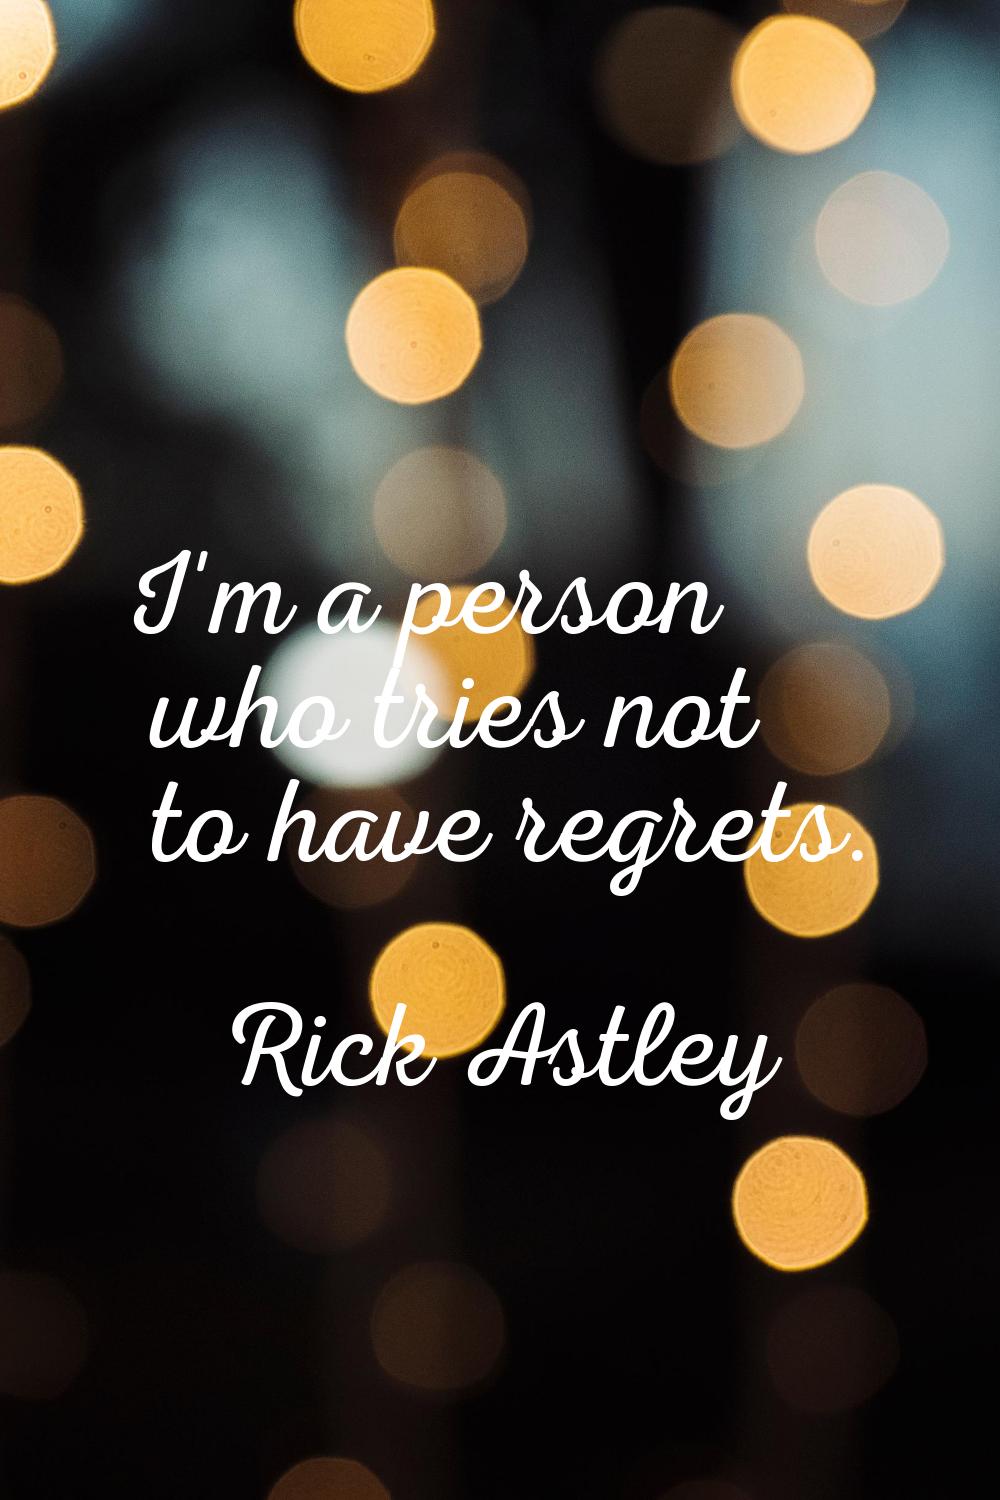 I'm a person who tries not to have regrets.